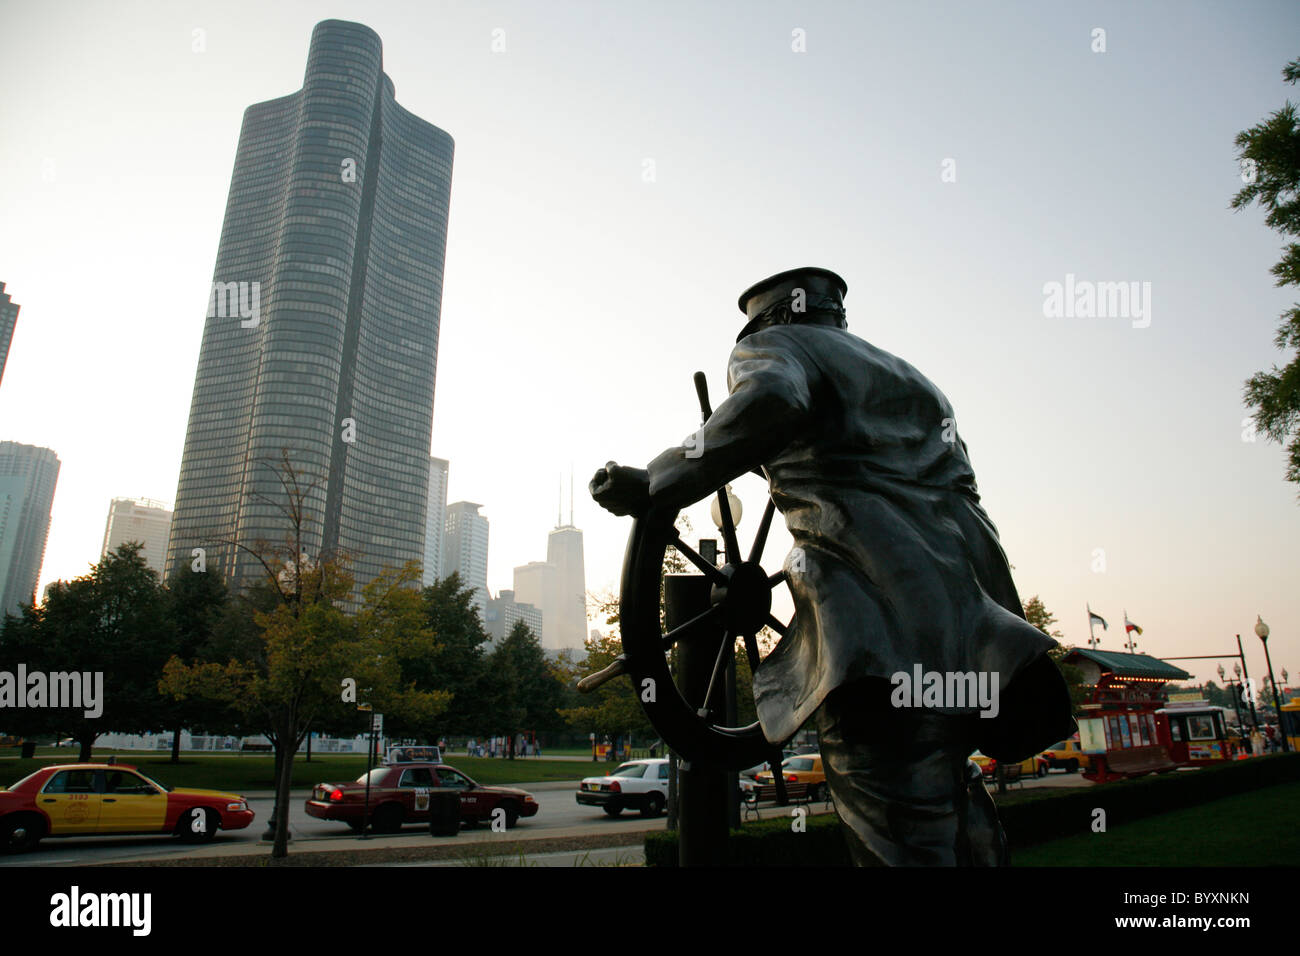 Captain on the Helm sailor statue at Navy Pier Chicago Illinois Stock Photo